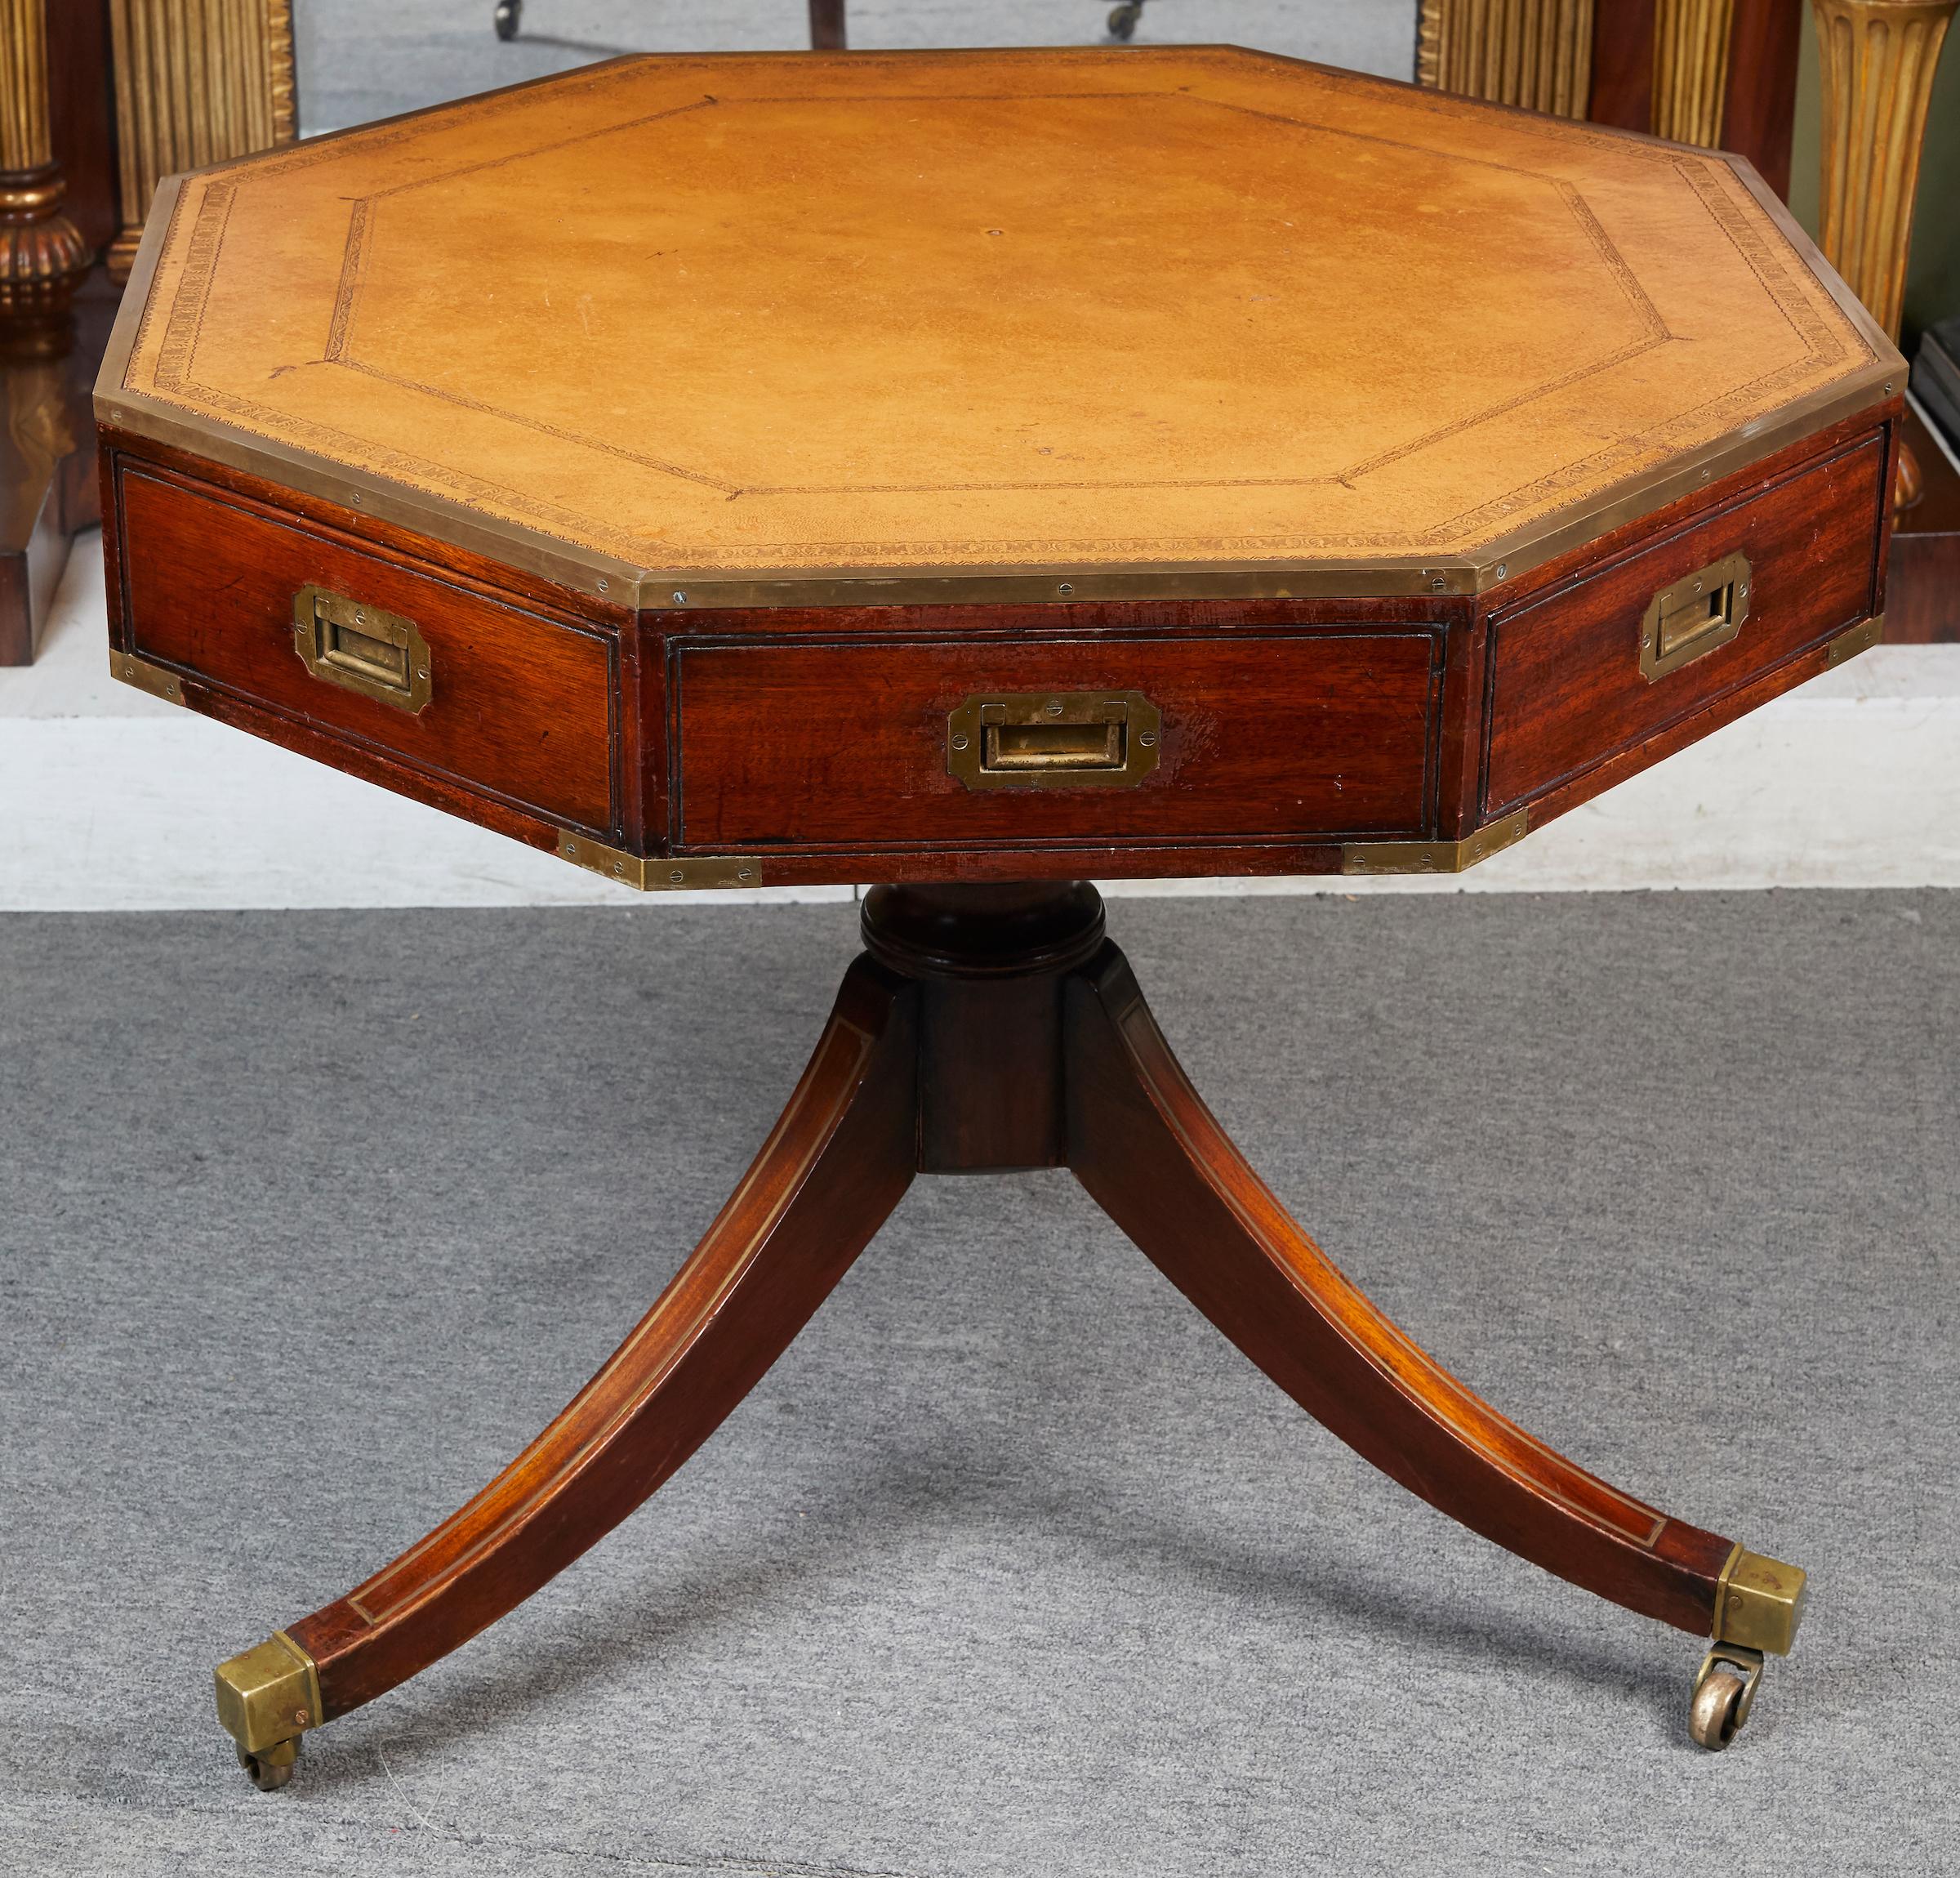 Elegant Campaign style mahogany octagonal drum table fitted with typical flush mount brass fittings and tooled leather top, resting on a single pedestal fitted with three saber legs ending with square brass casters .
Size of top from flat side to